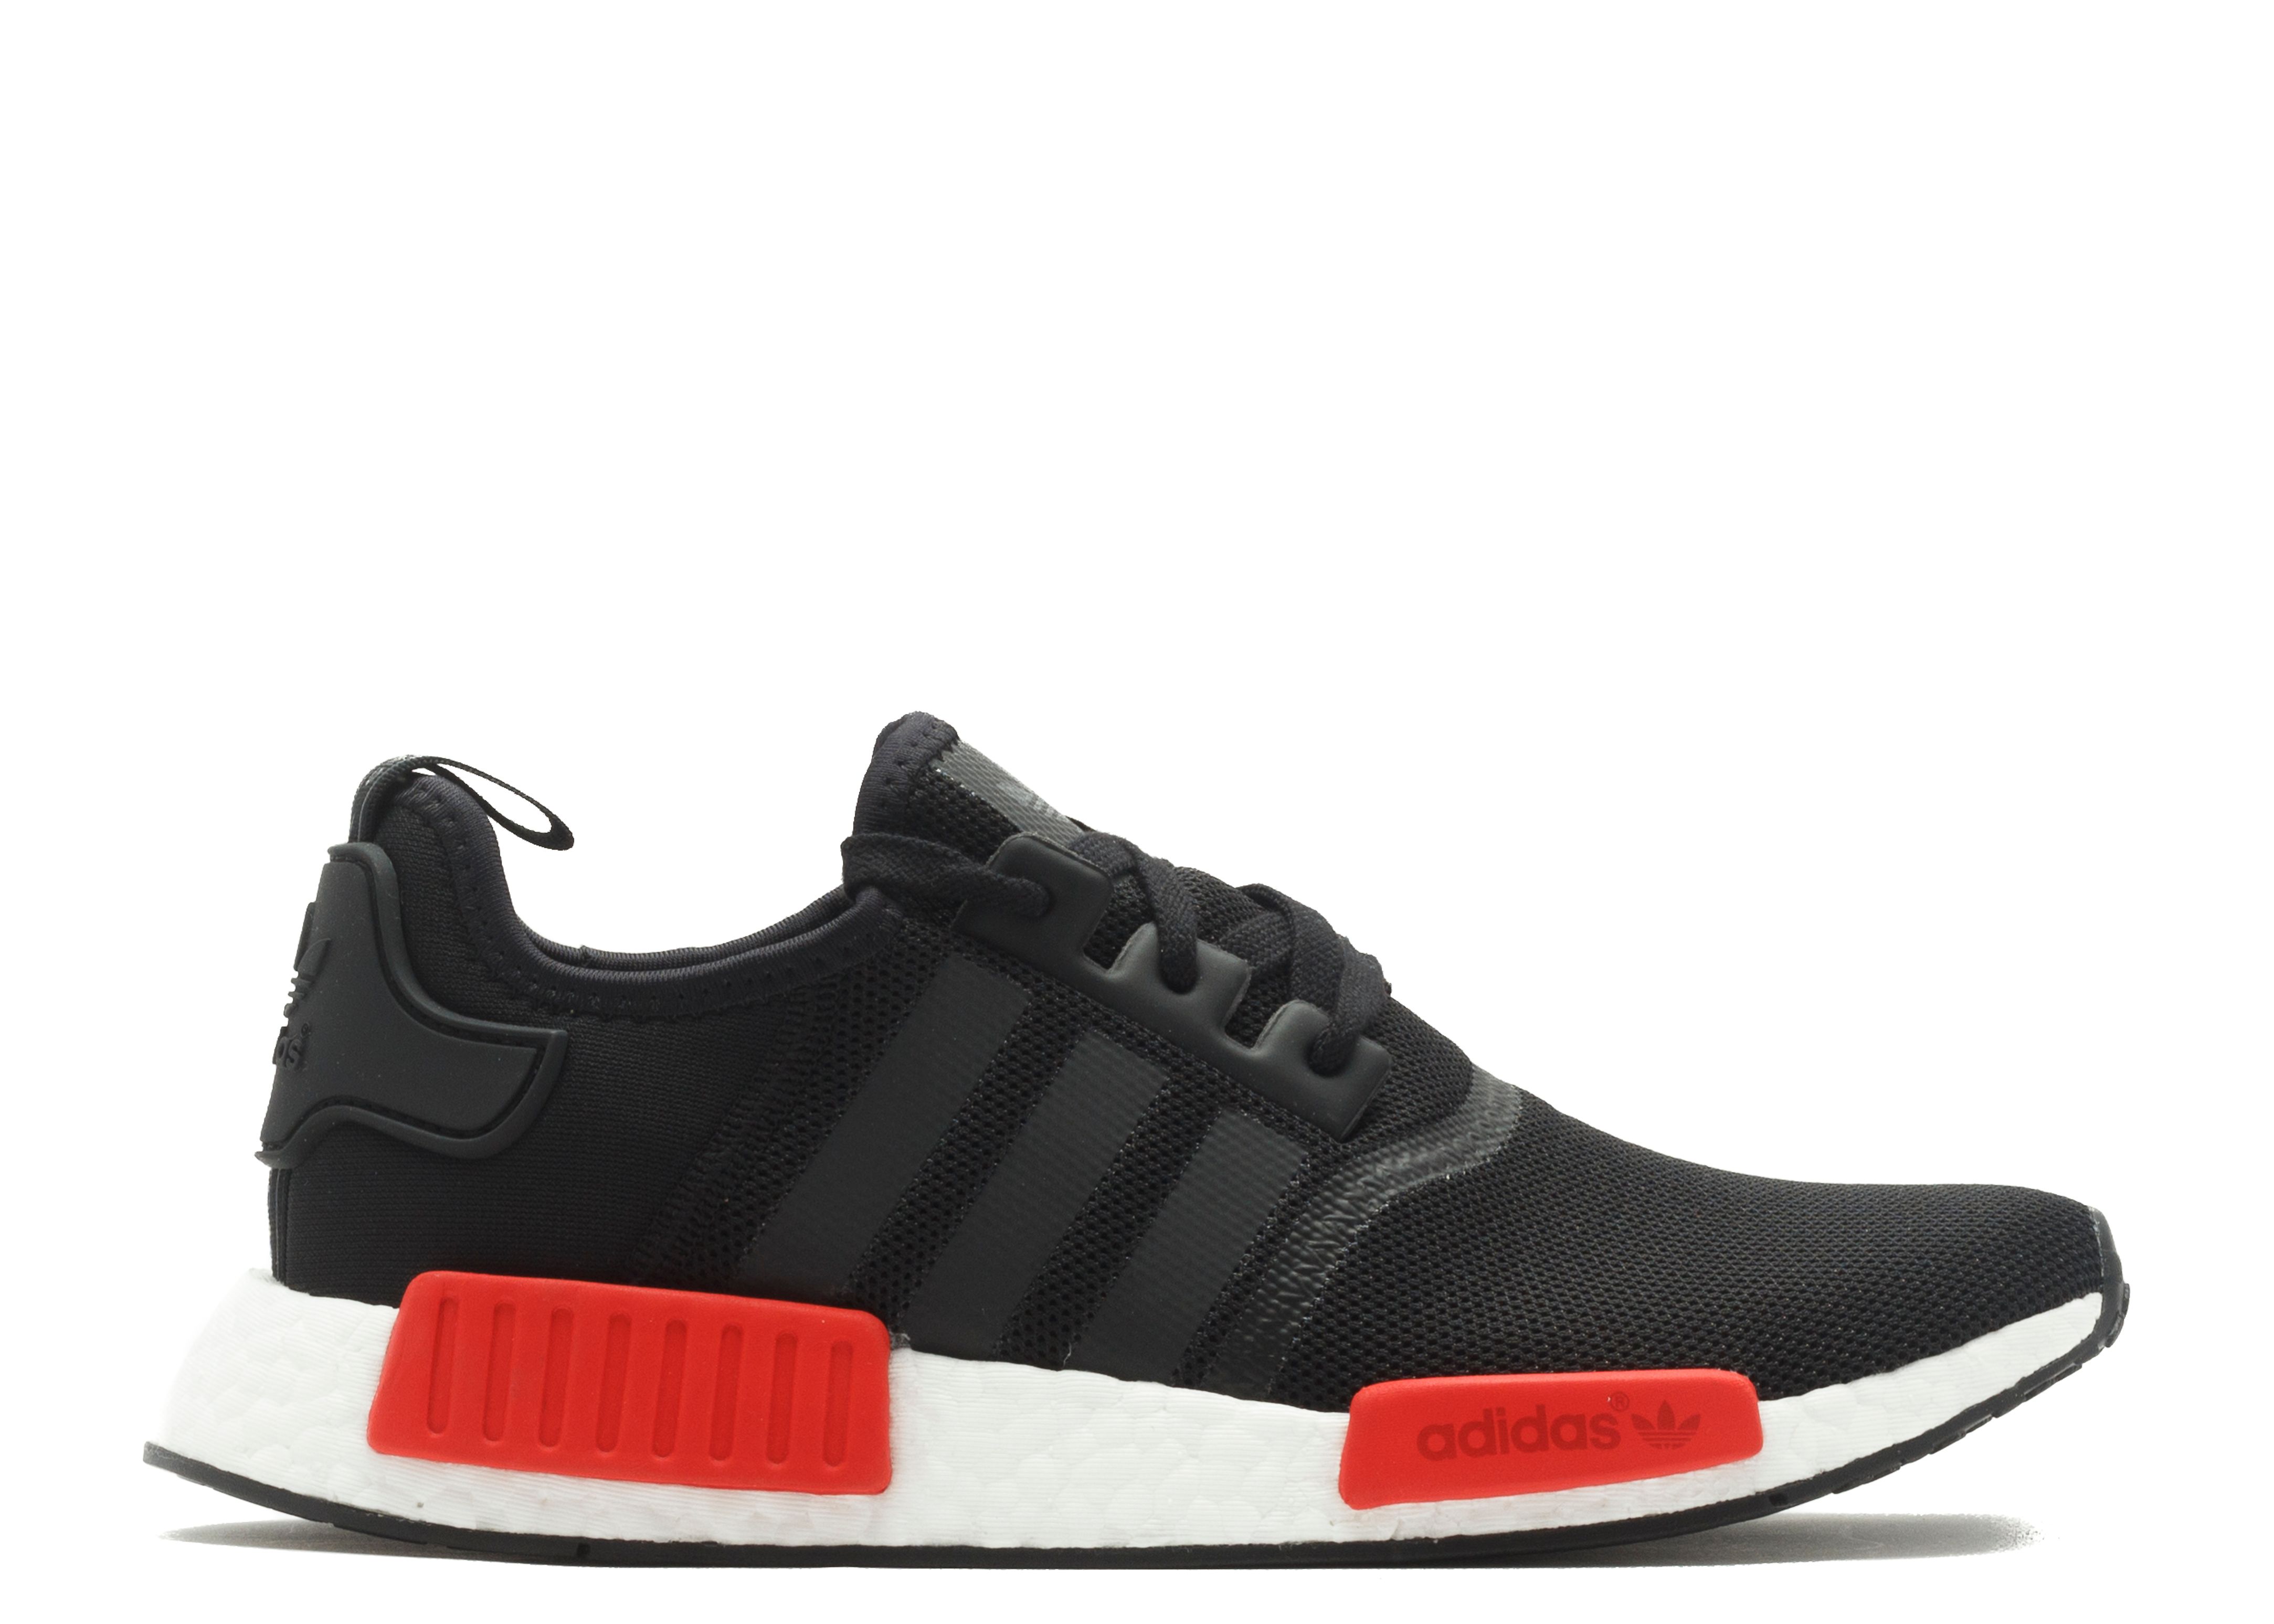 nmd bred